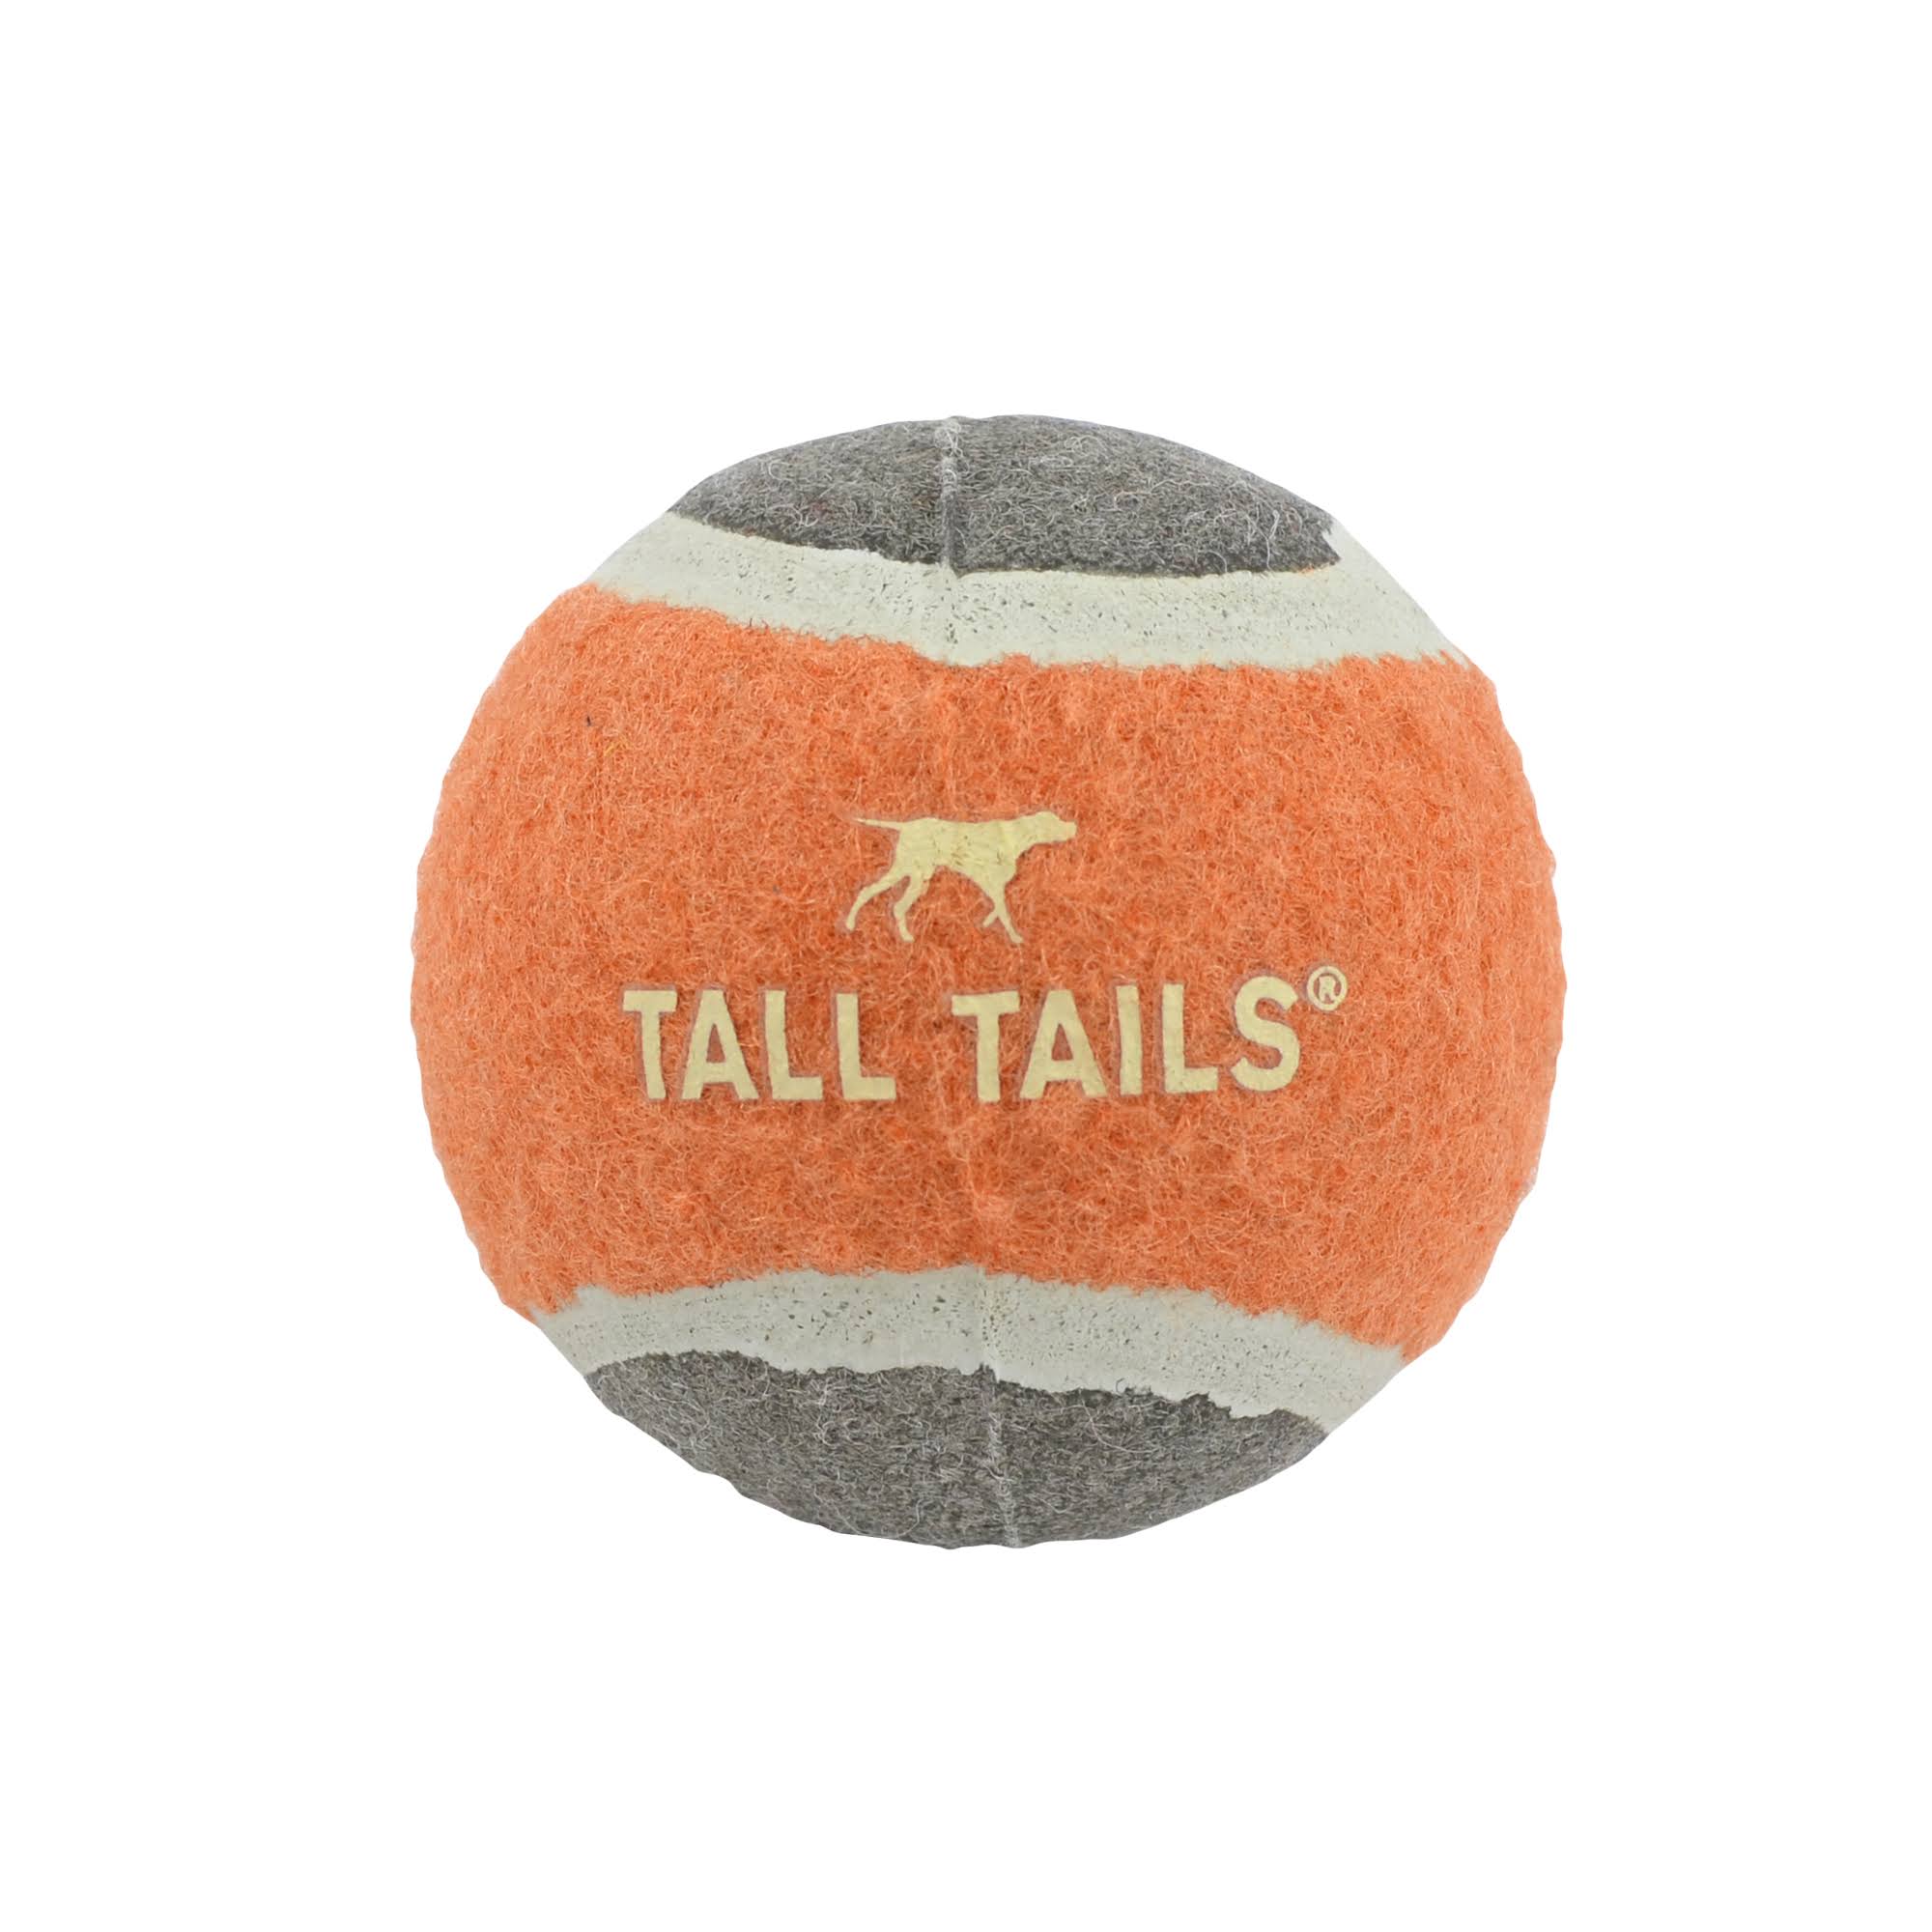 Tall Tails 88216263 Sport Ball Dog Toy Orange - Small - 2 in.